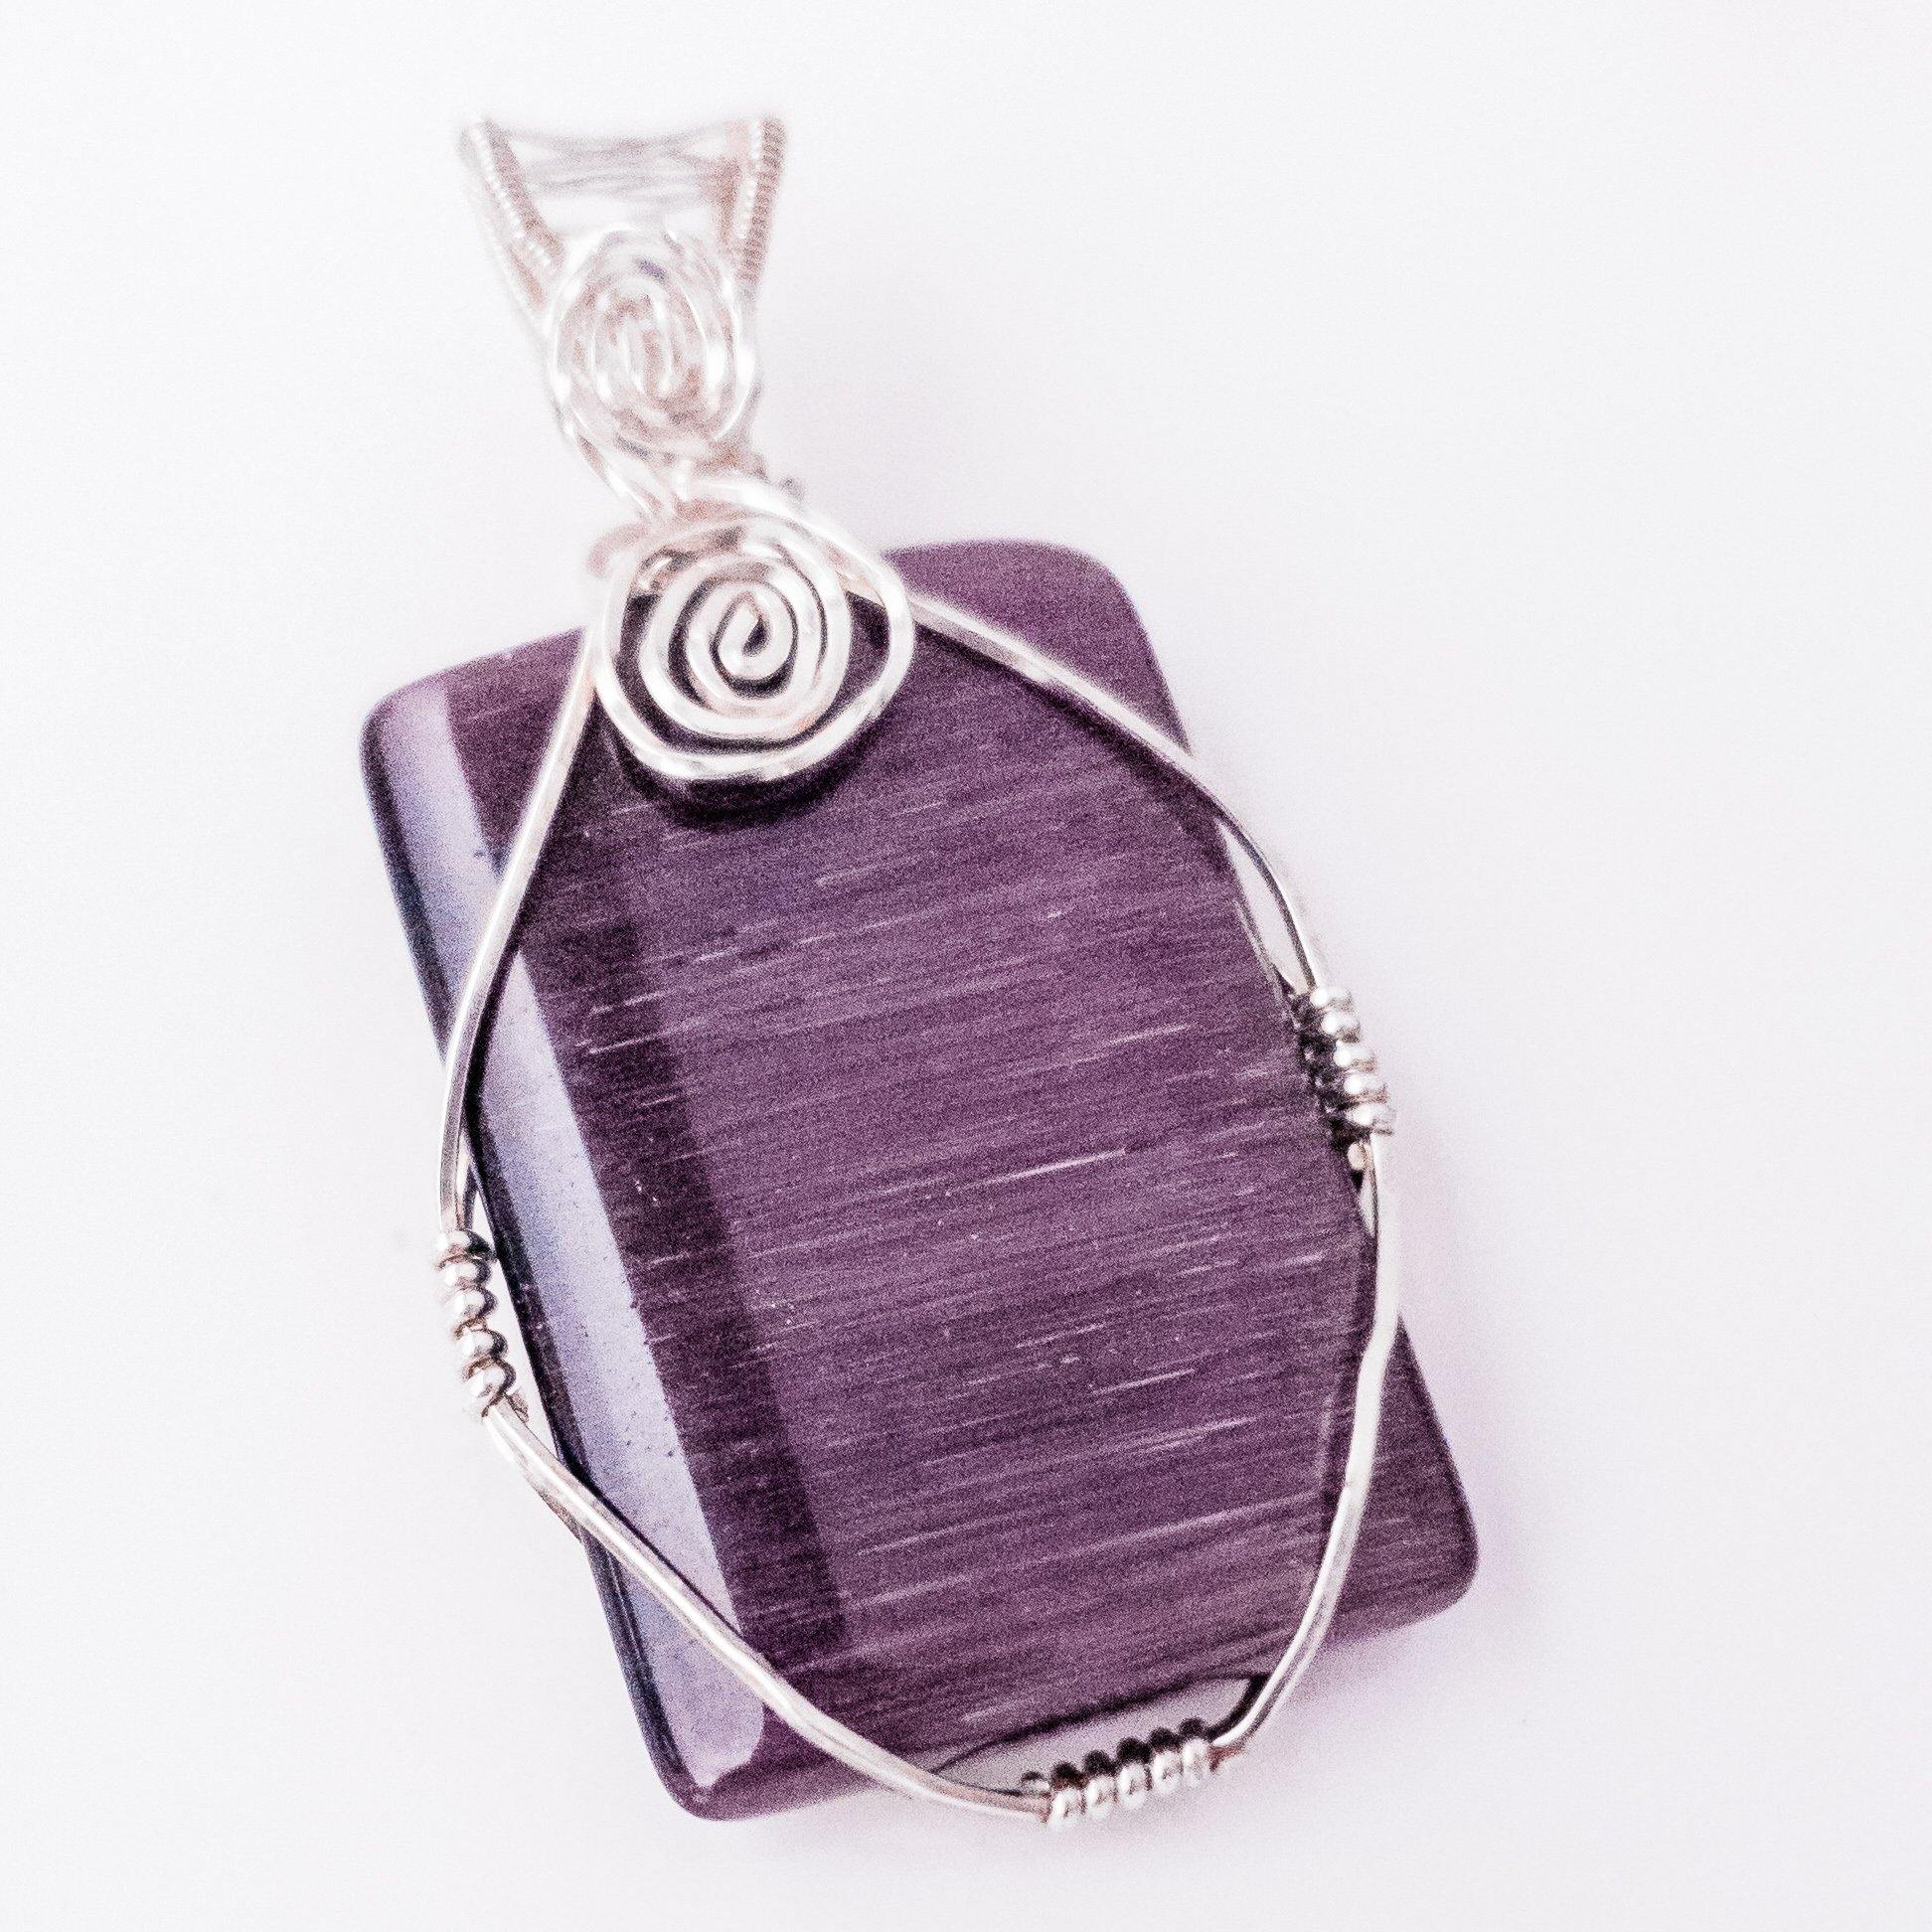 Purple Cat's Eye Necklace Pendant in Sterling Silver close-up view - BellaChel Jeweler